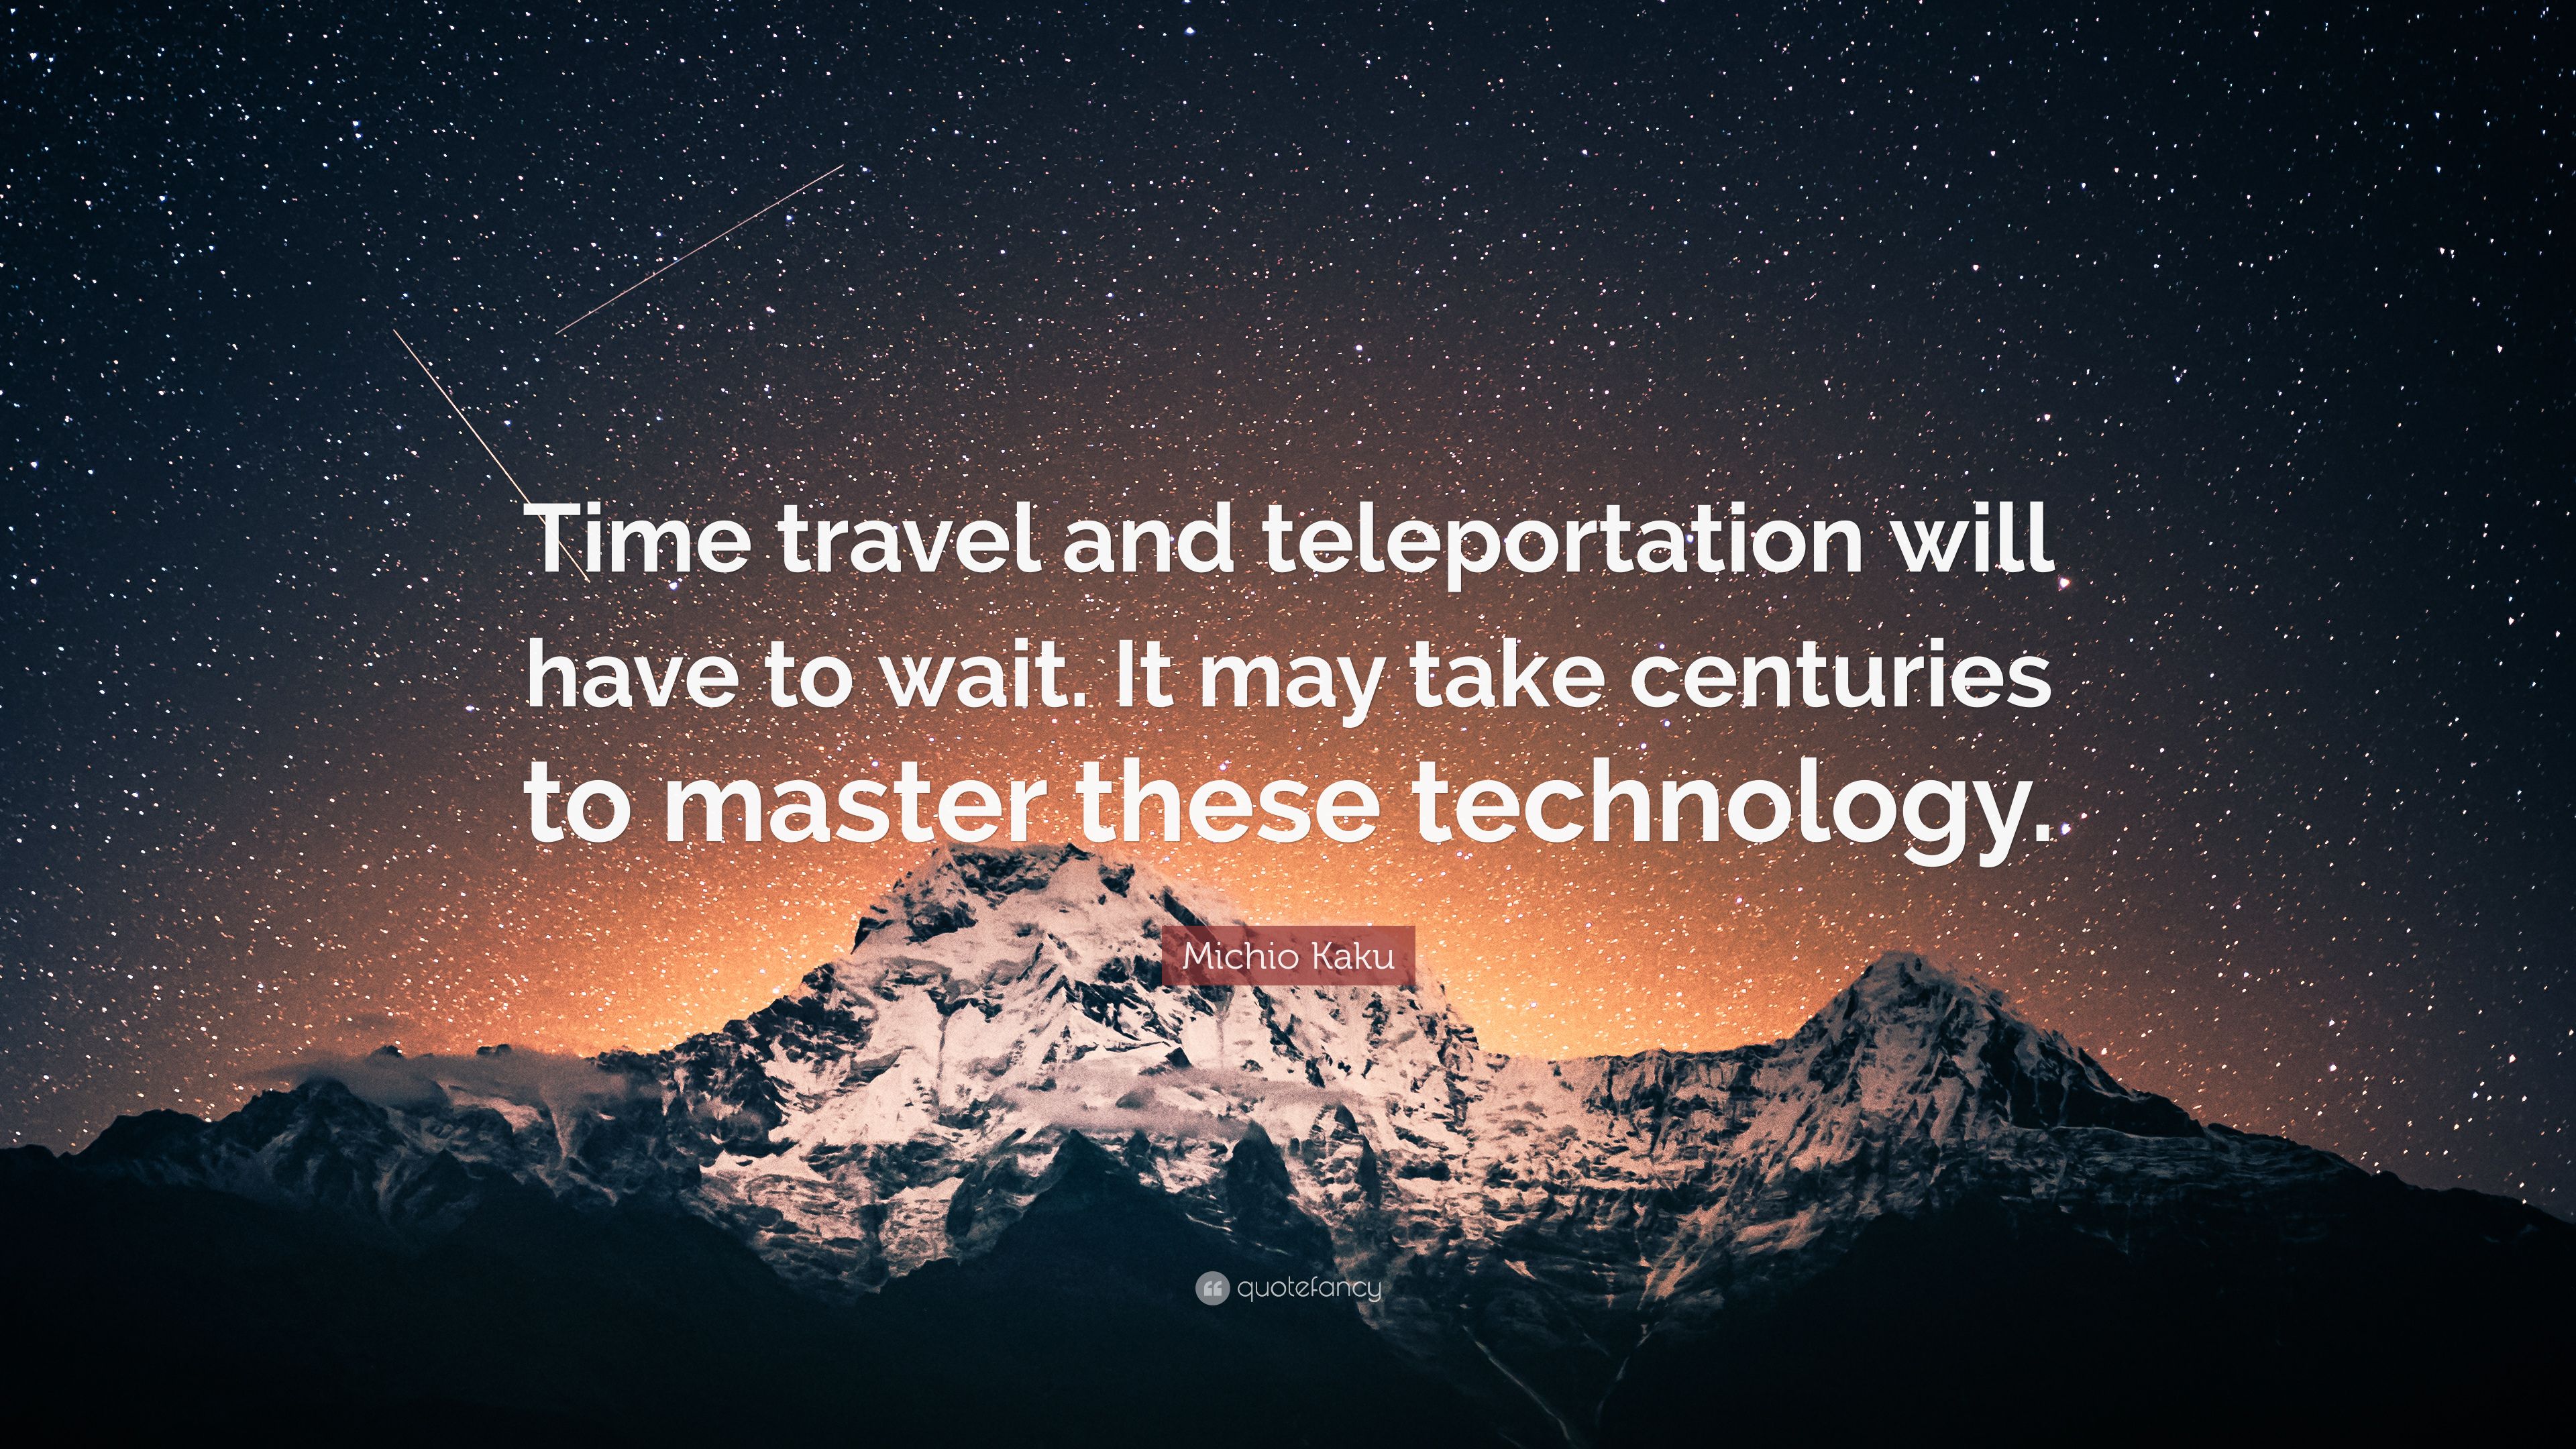 Michio Kaku Quote: “Time travel and teleportation will have to